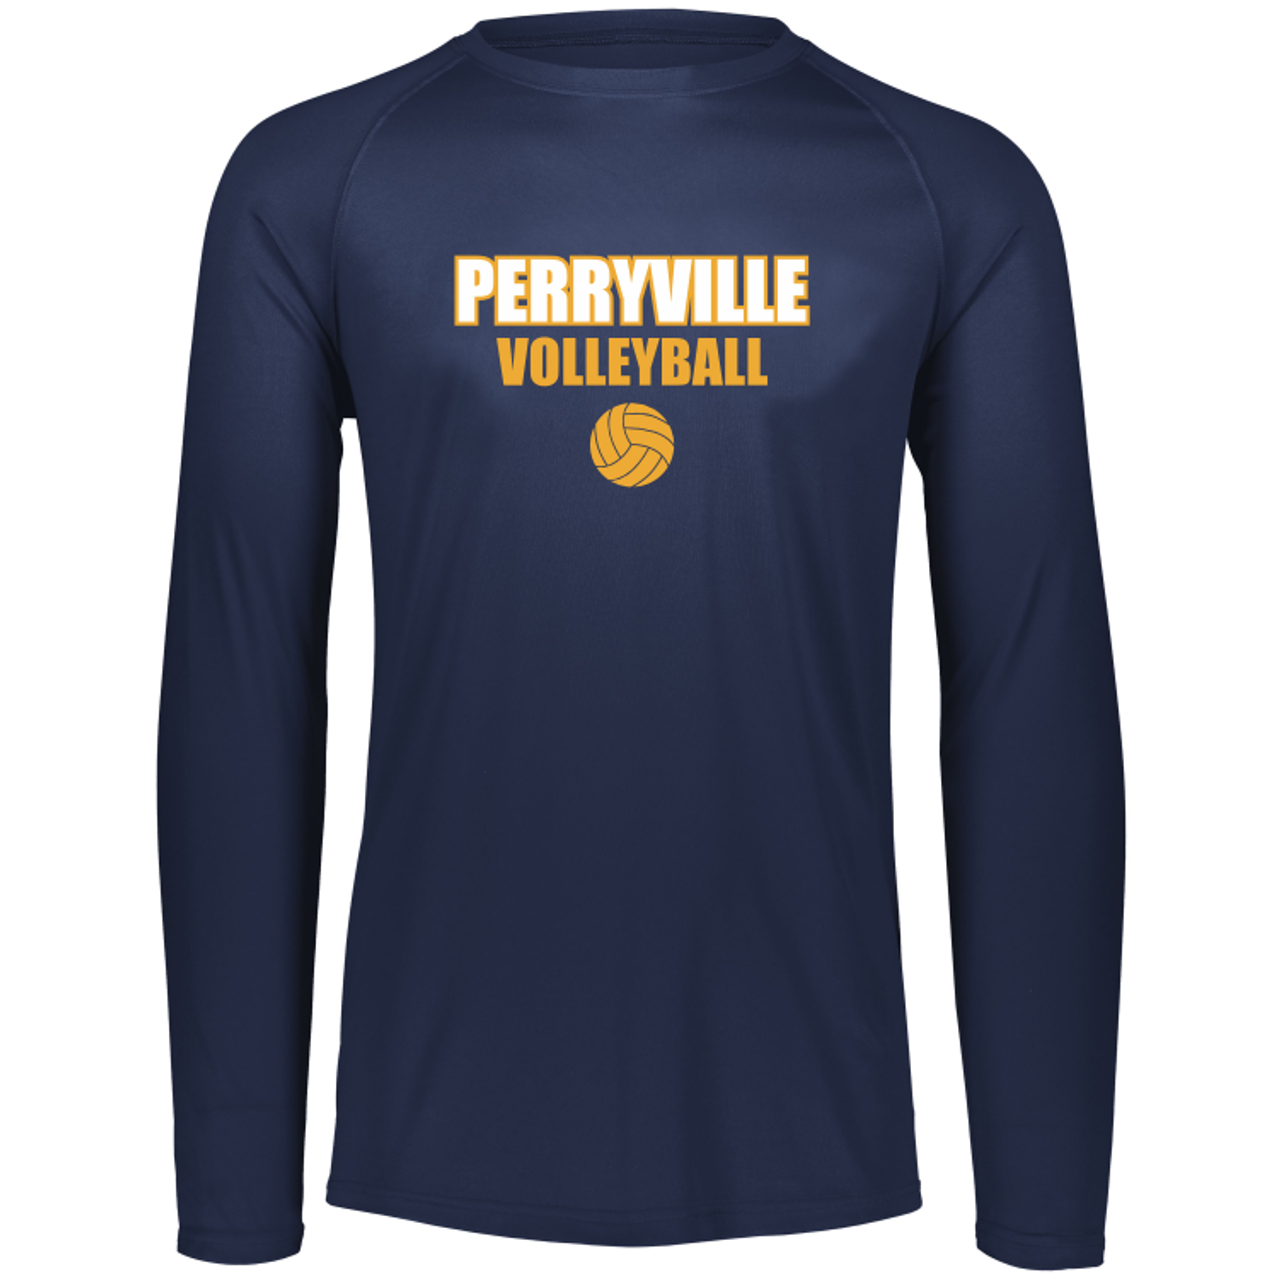 Perryville Volleyball Long Sleeve Performance Tee